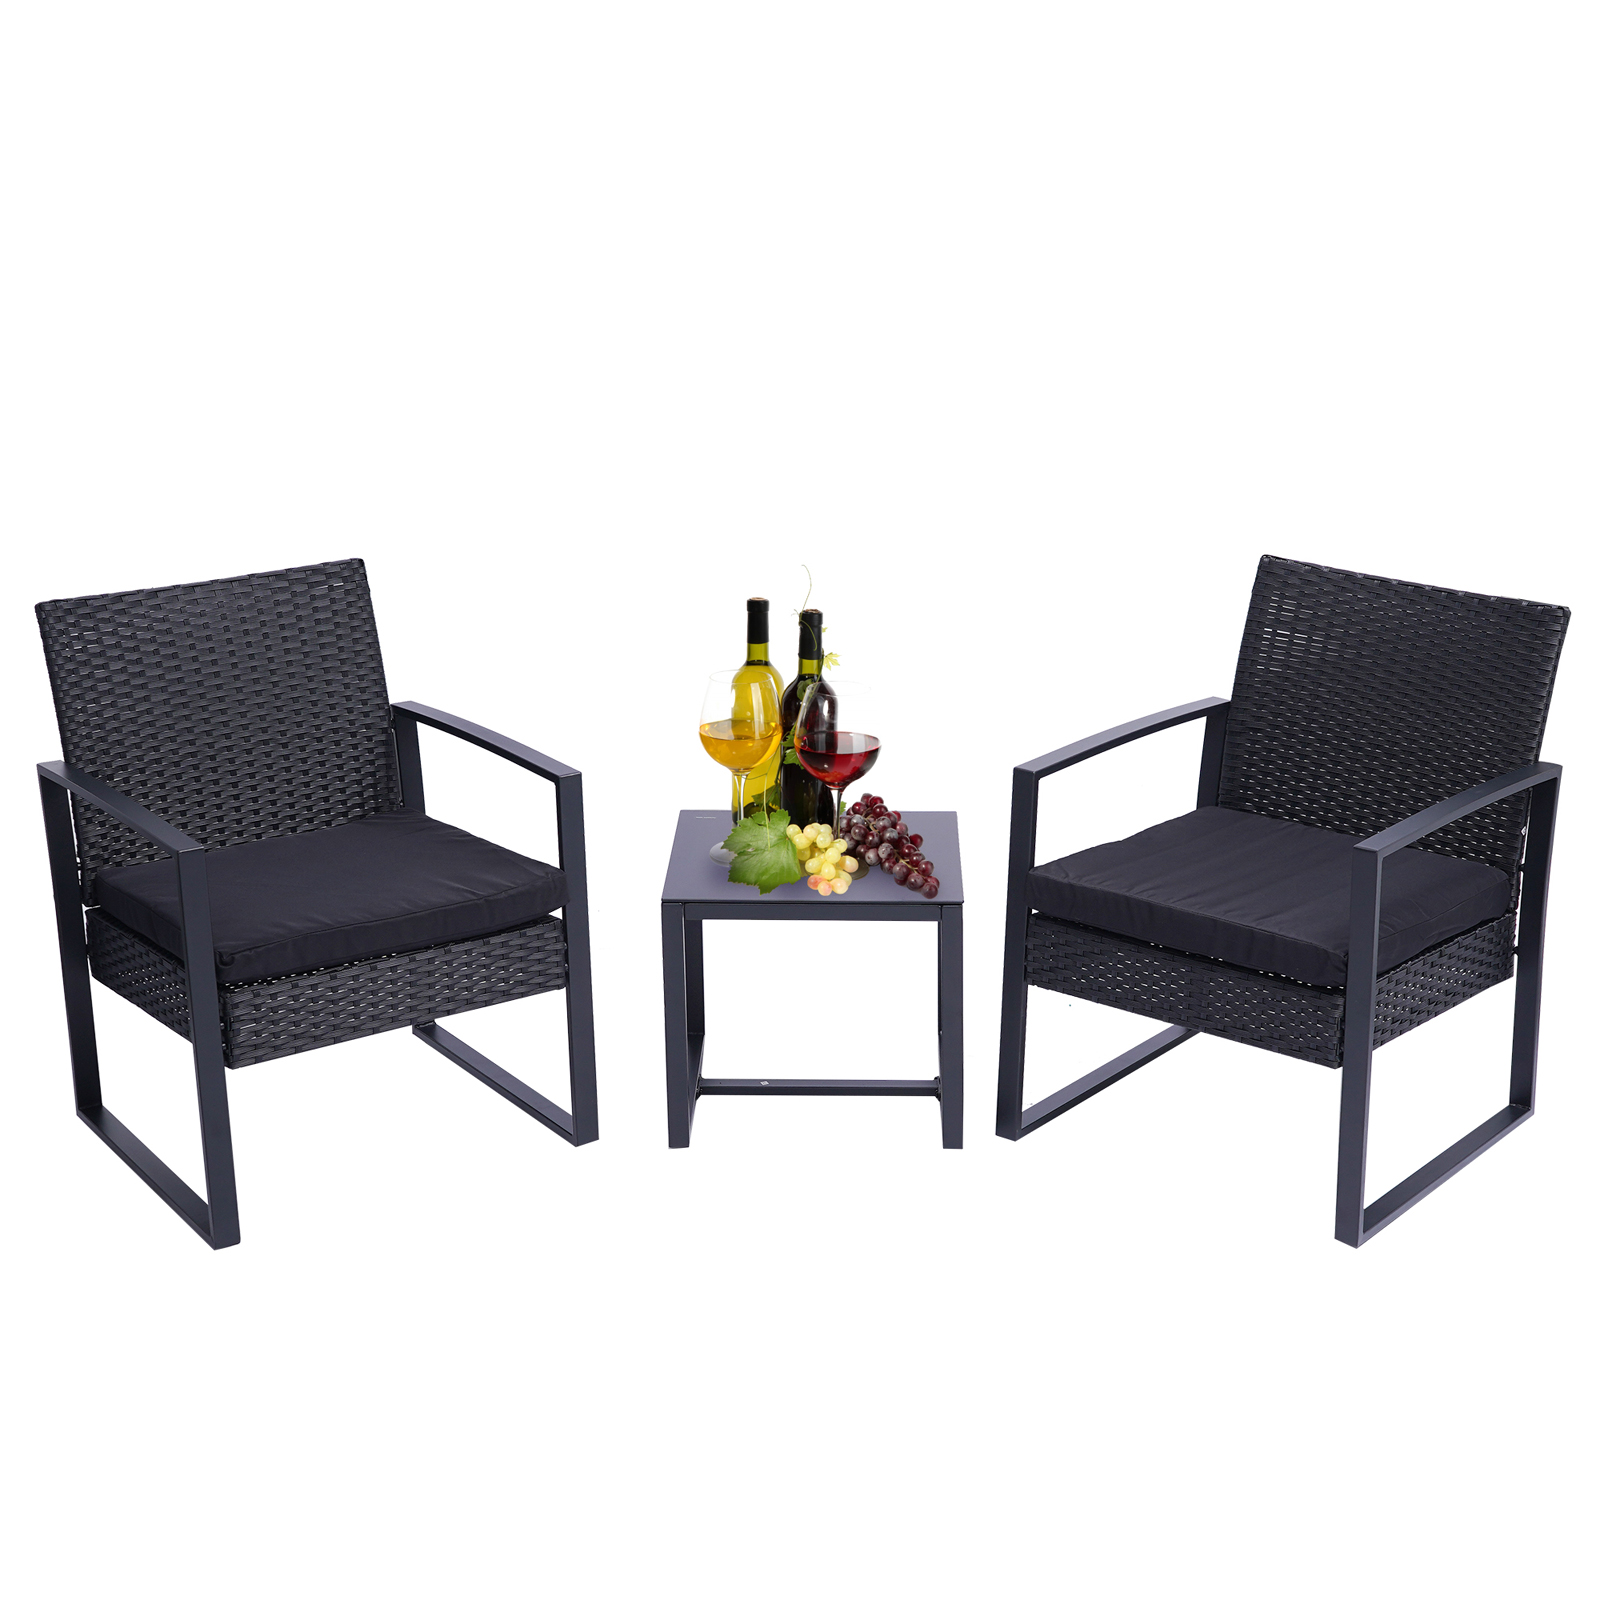 Outdoor Rattan Furniture, SEGMART 3 Piece Wicker Conversation Bistro Set, All Weather PE Wicker Chairs with Cushions and Glass Coffee Table, Wicker Set for Backyard Porch Lawn Garden Balcony, LL773 - image 1 of 7